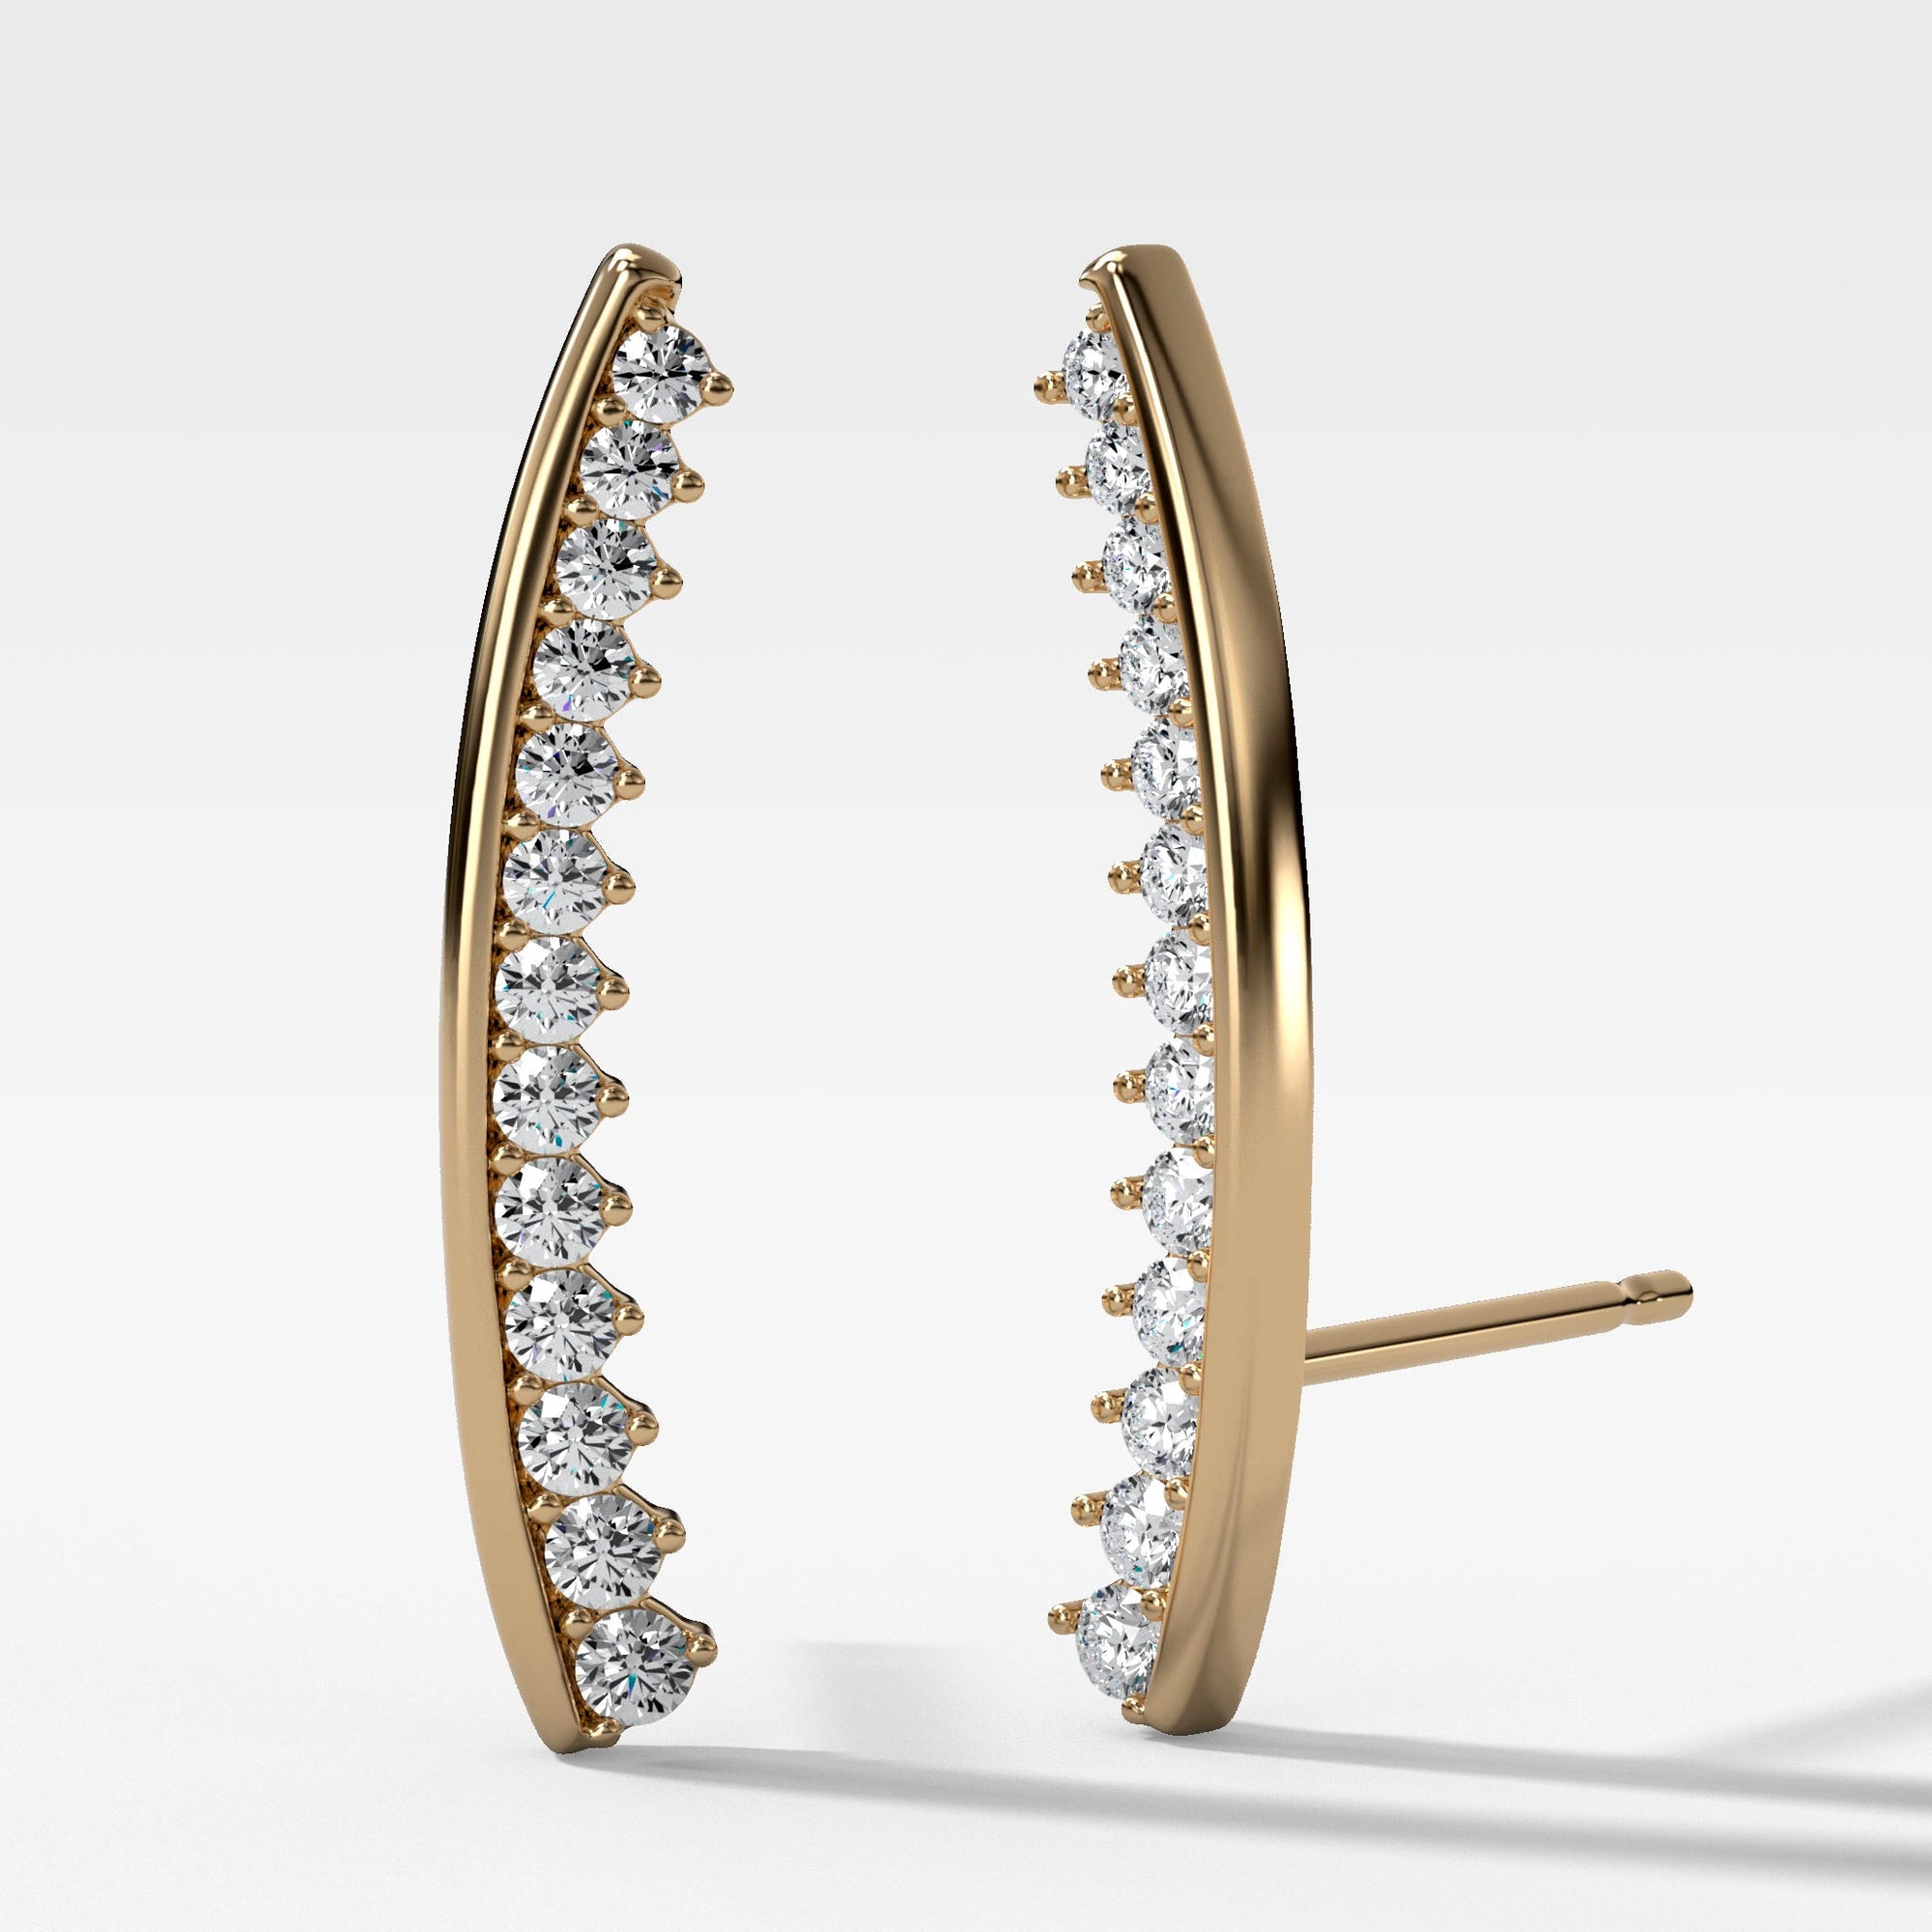 Diamond Ear Climbers in Yellow Gold by Good Stone